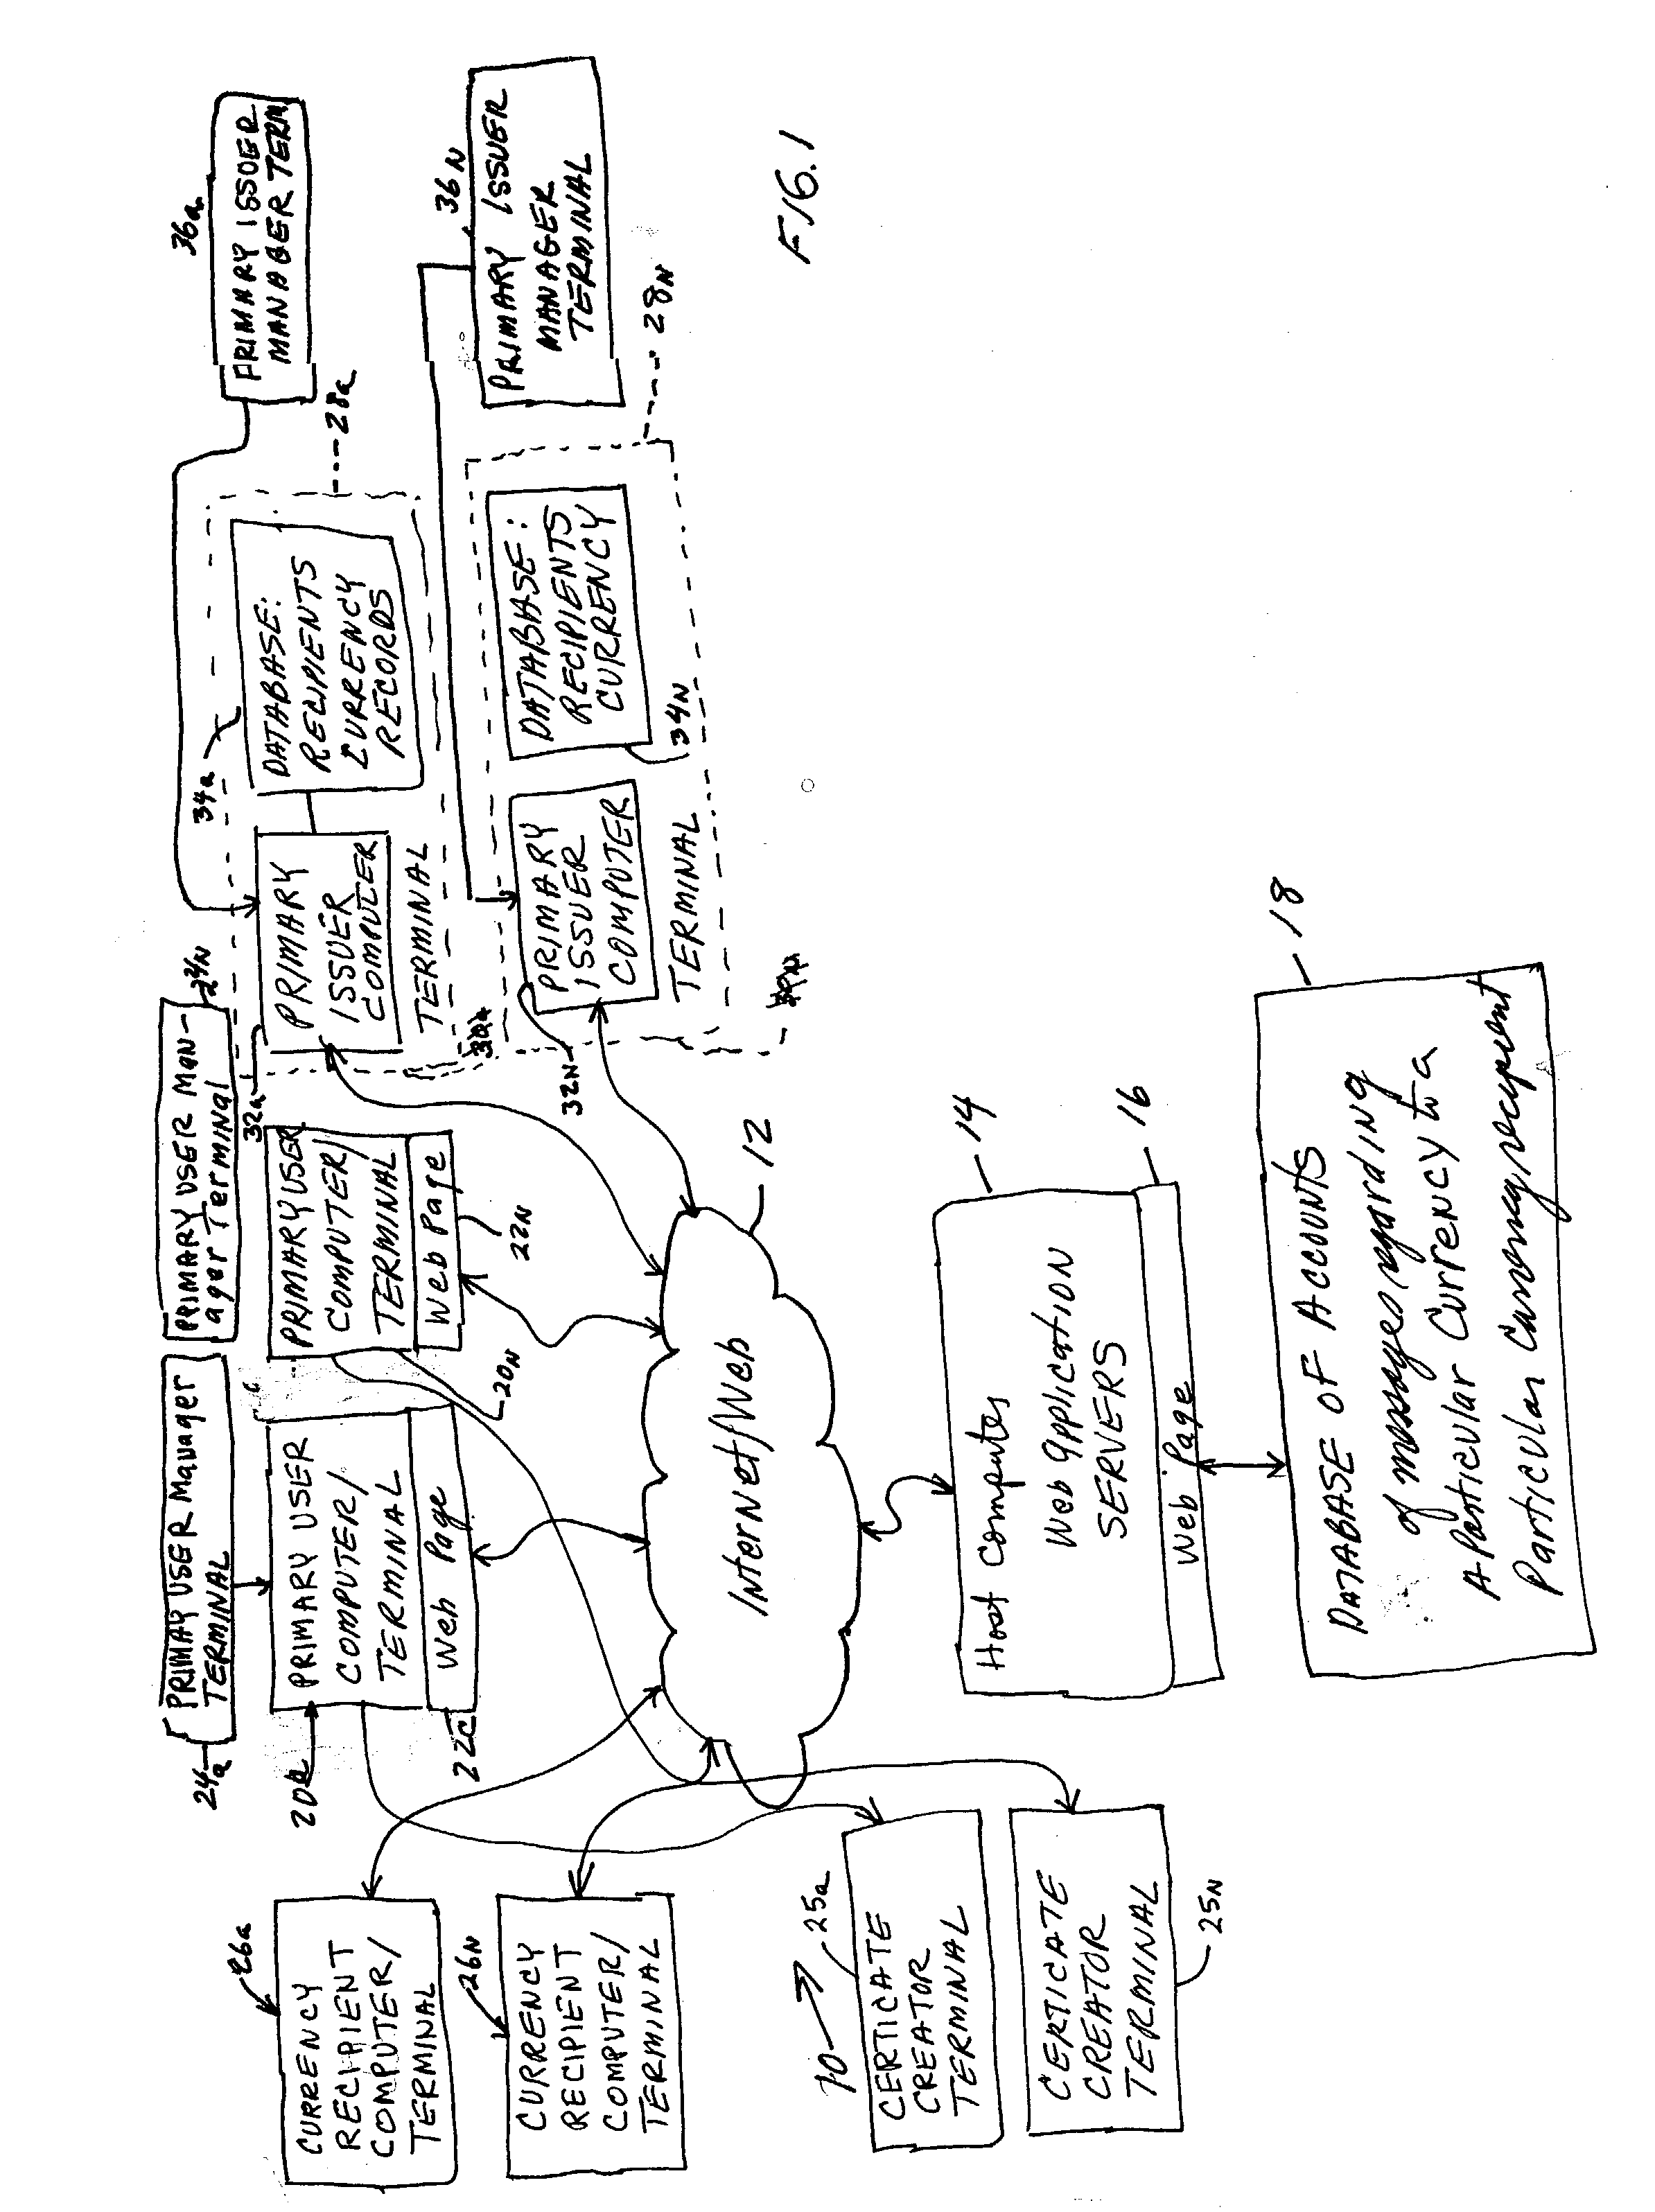 Apparatus and method of distributing and tracking the distribution of incentive points